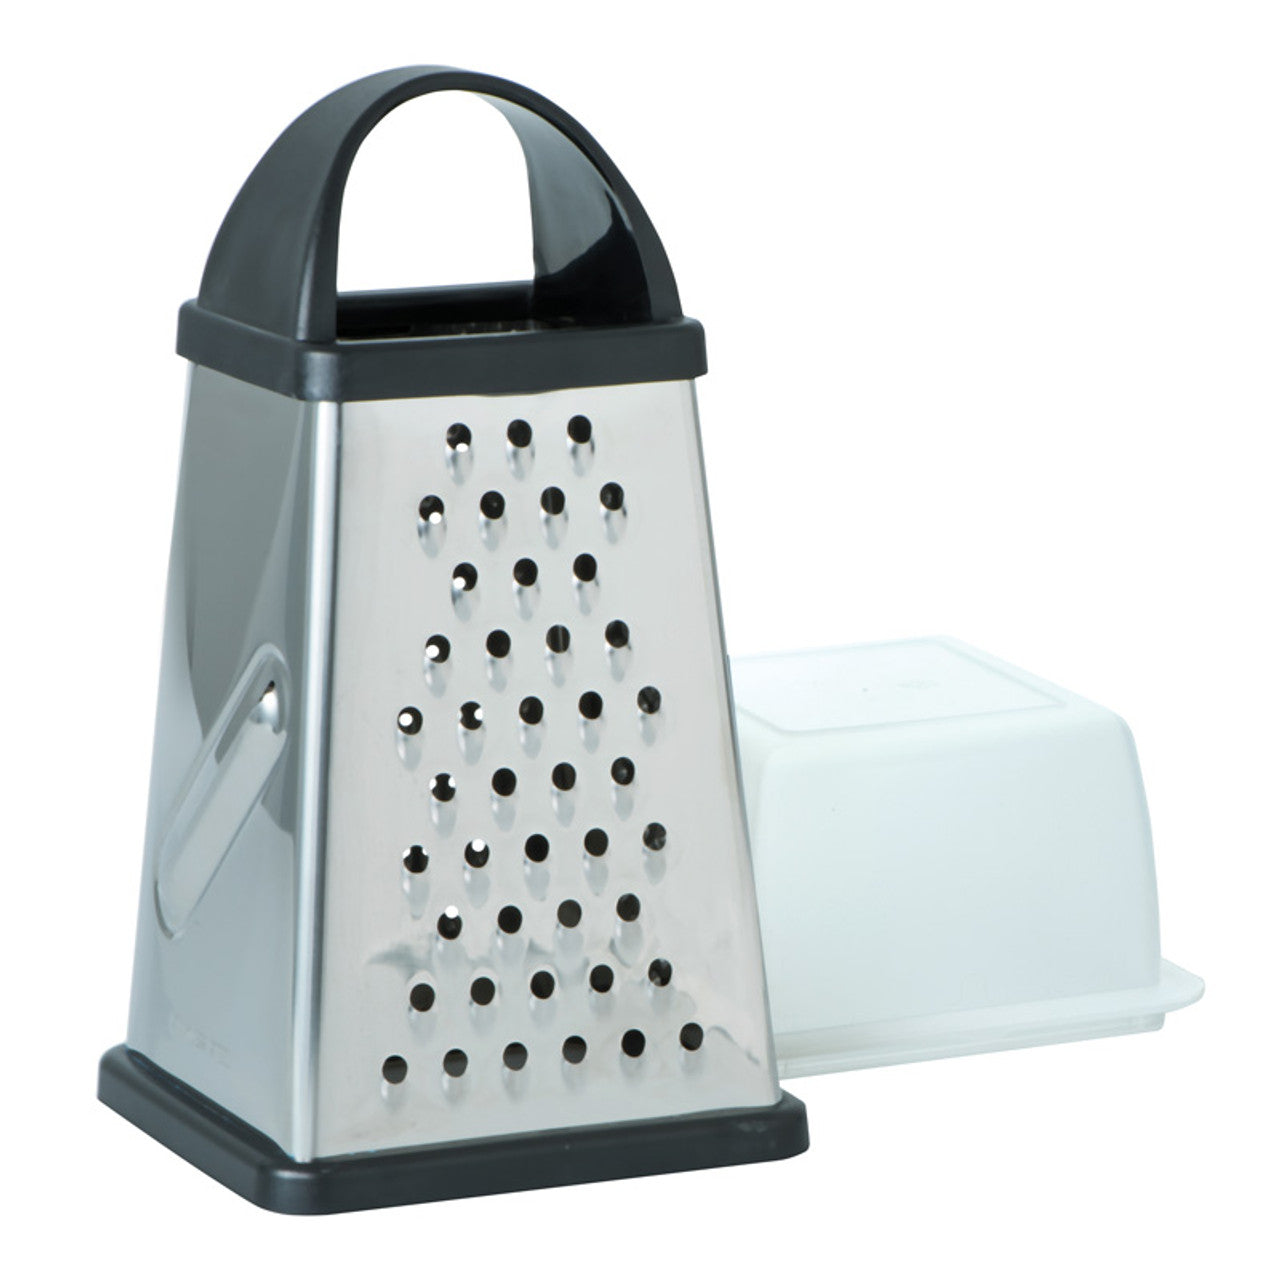 Box Grater - 4 Sided With Storage Box